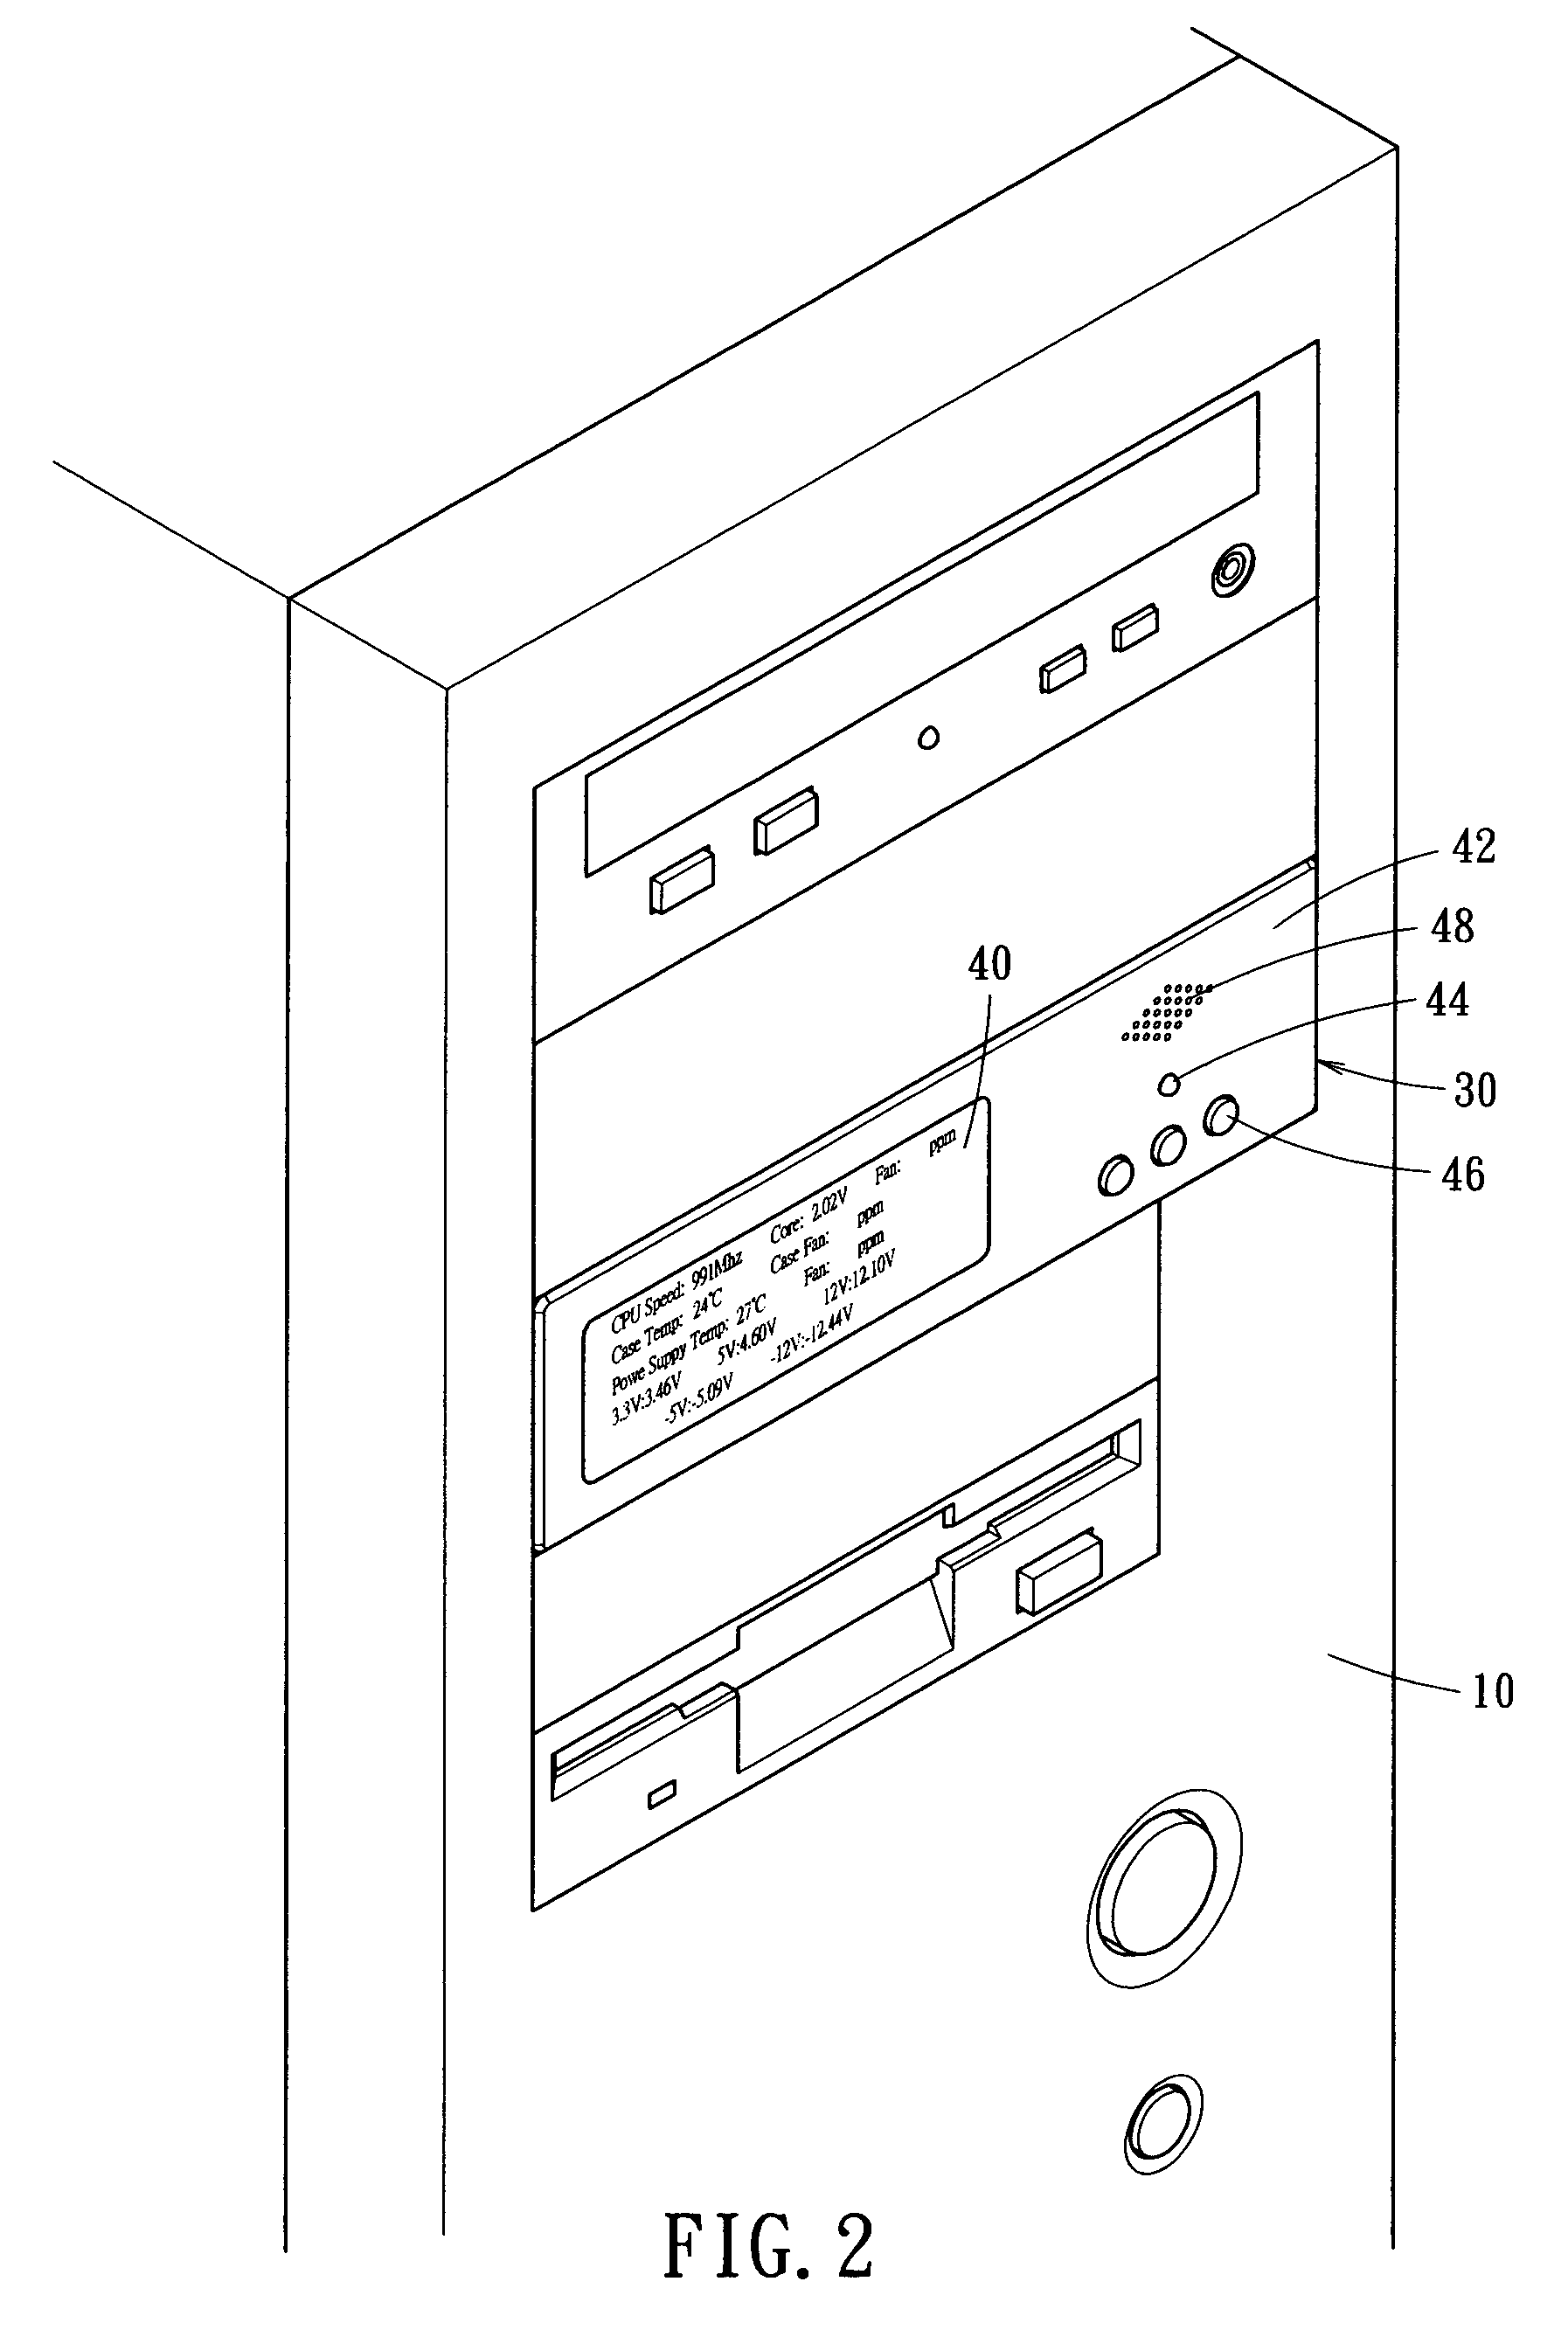 Monitor apparatus for computer system